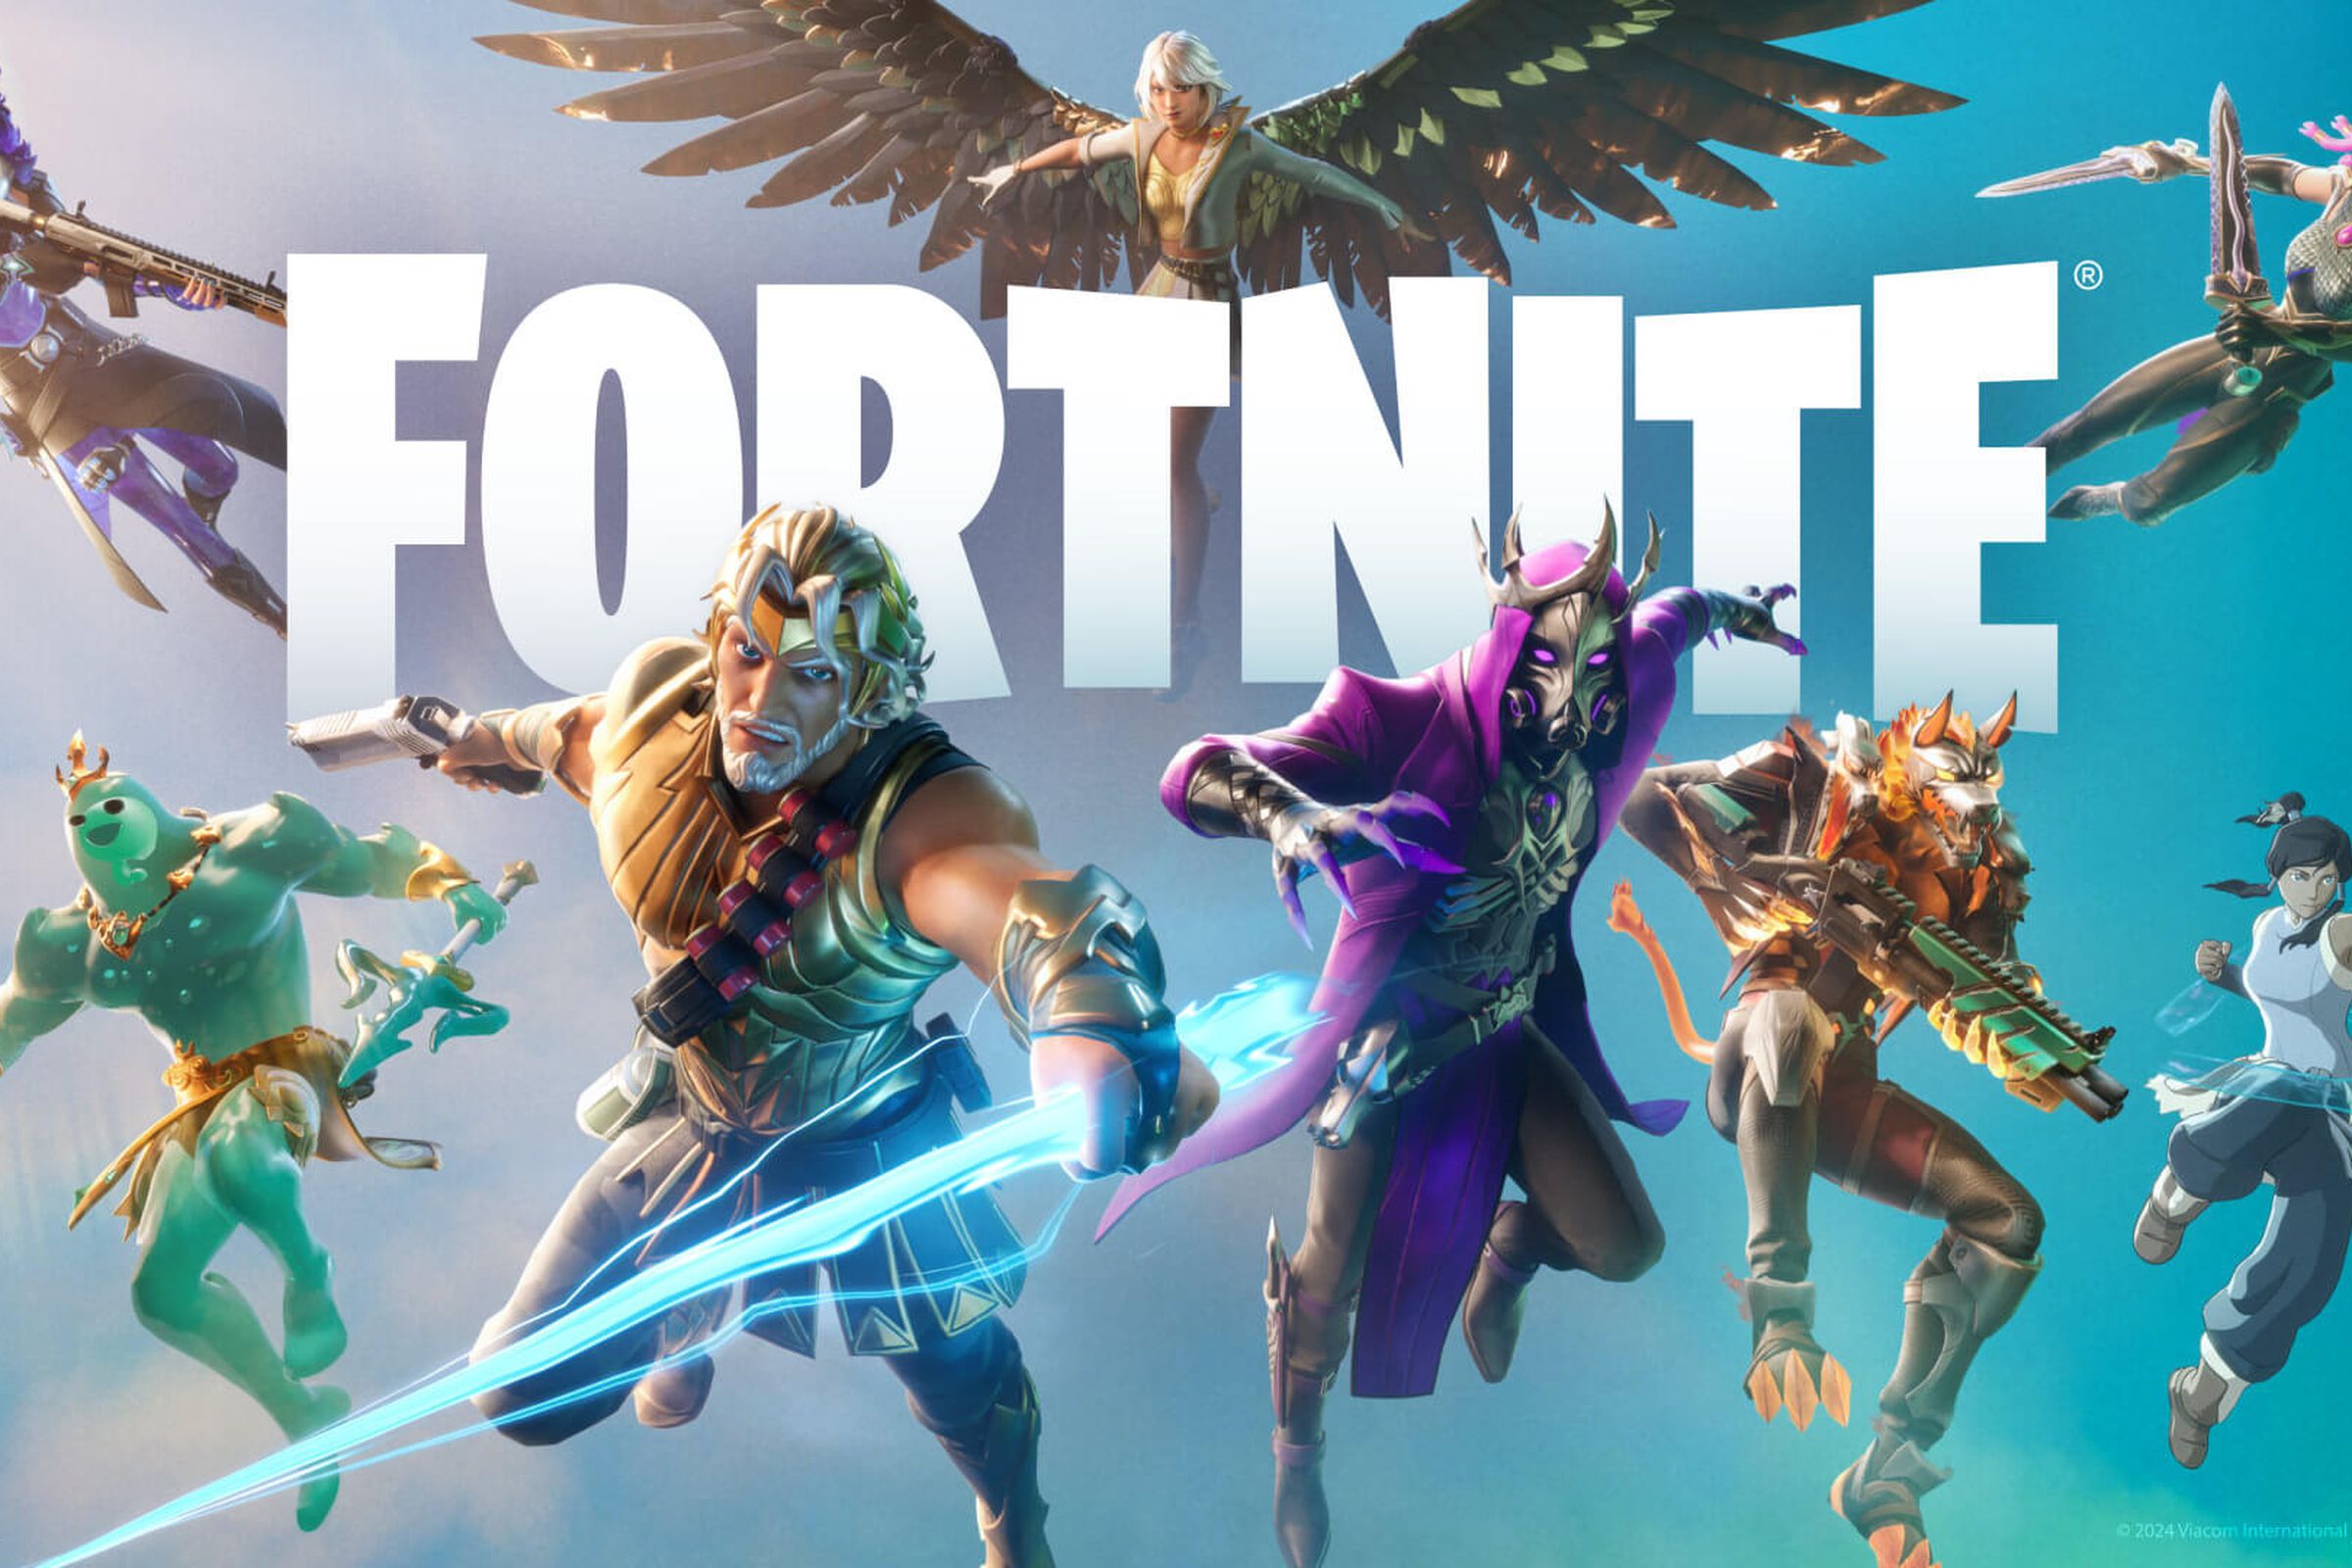 Promotional image for the new season of Fortnite, showing the season’s new character skins around the game’s logo.